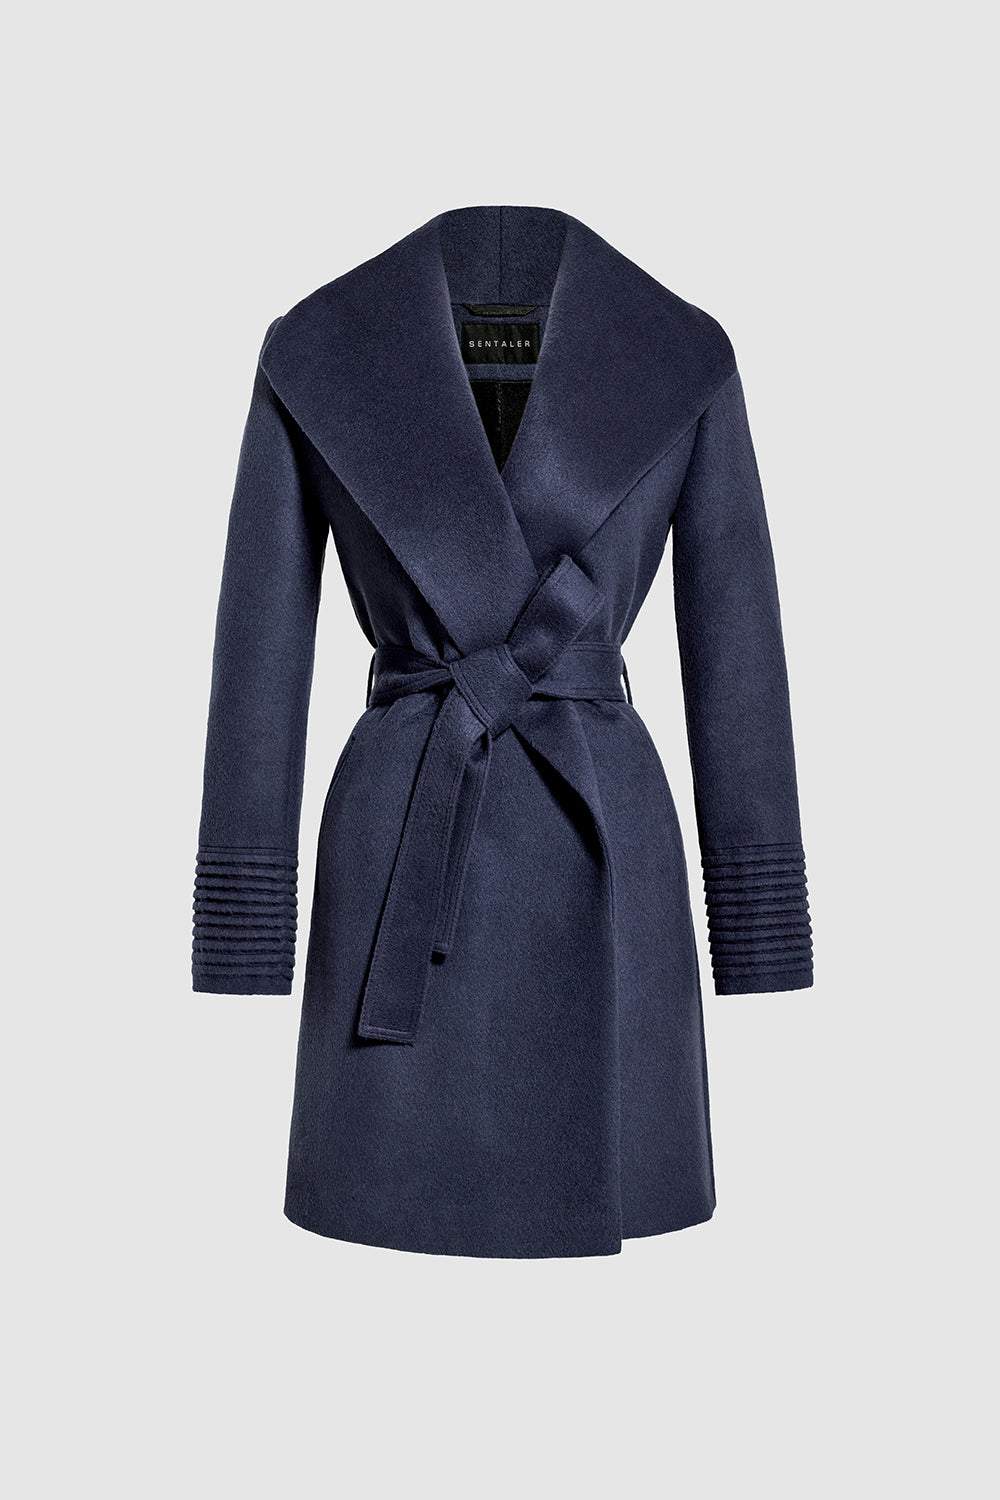 Unique Bargains Women's Shawl Collar Lapel Belted Winter Coat with